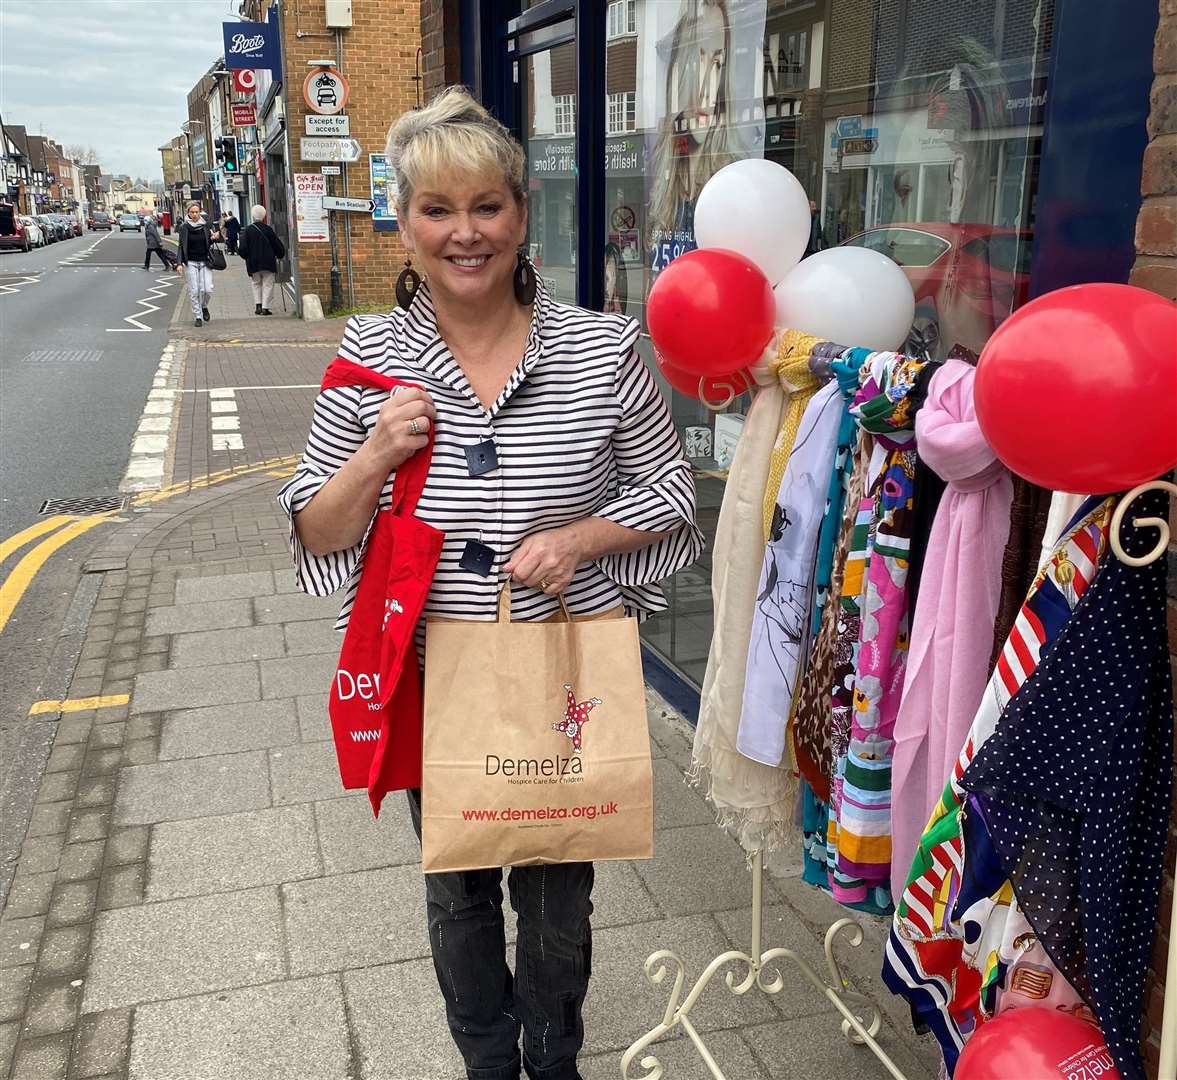 Singer Cheryl Baker offered her support at the opening of the Demelza store in Sevenoaks